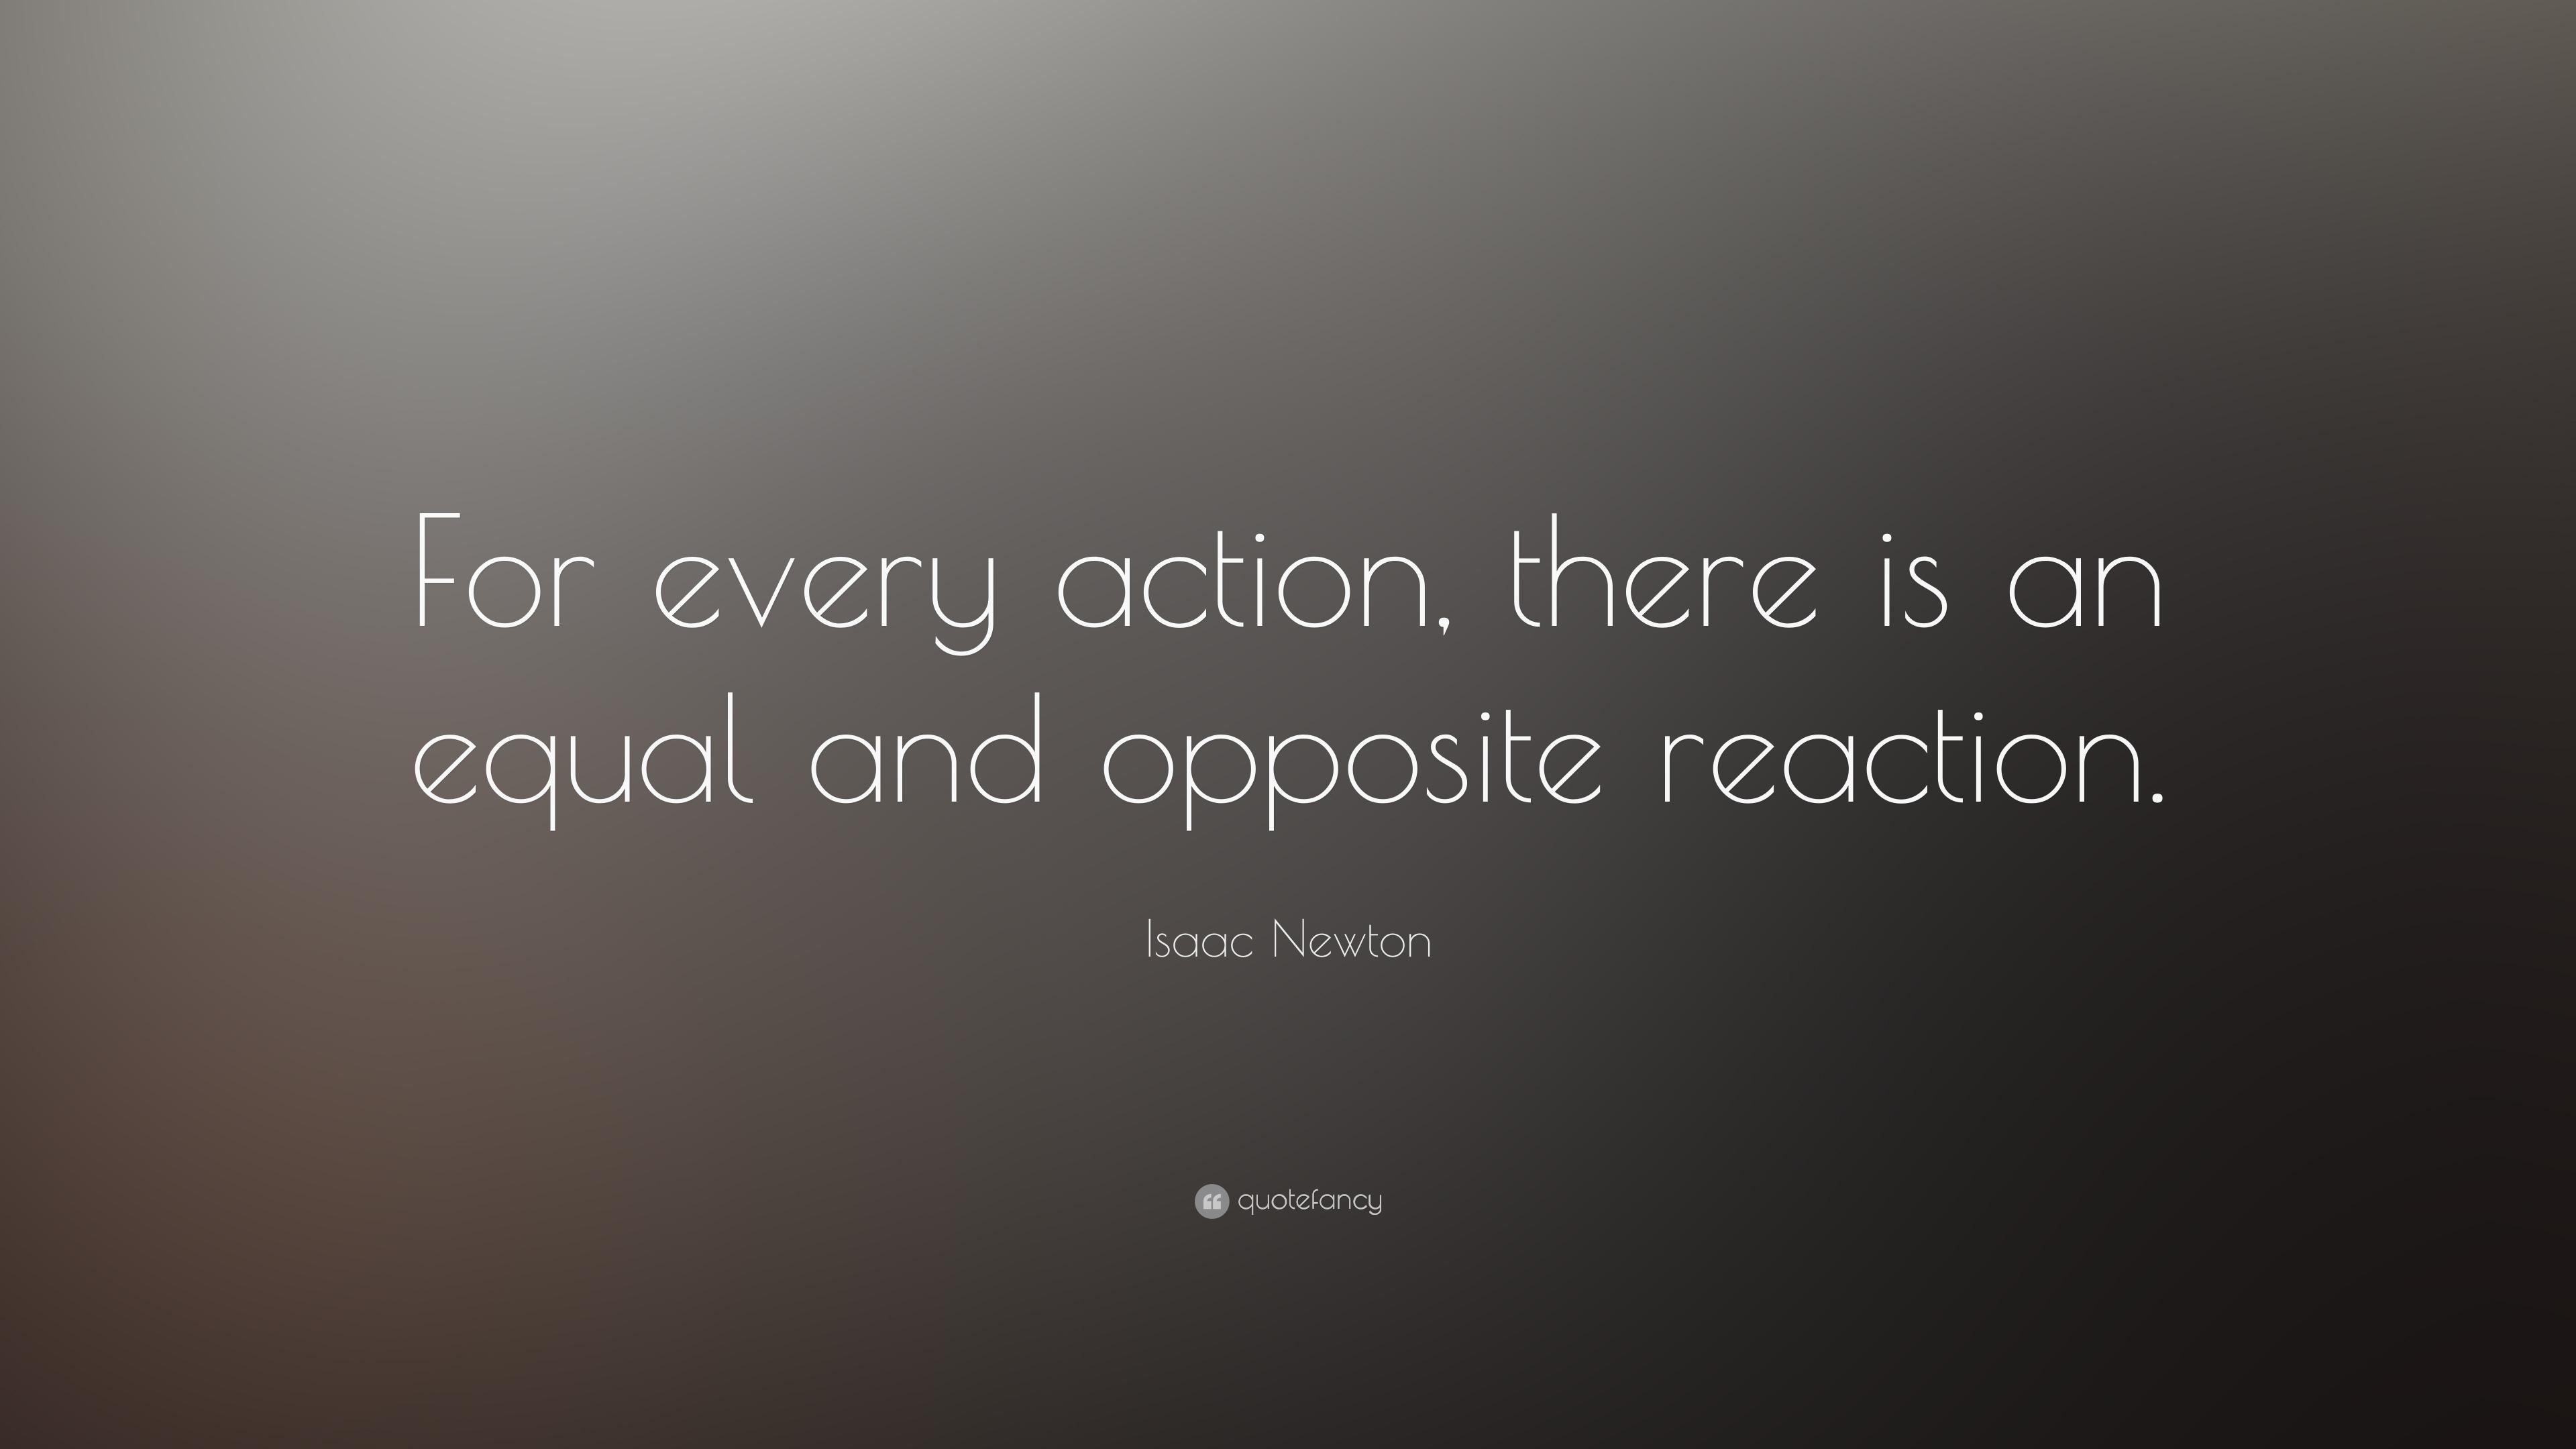 Isaac Newton Quote: “For every action, there is an equal